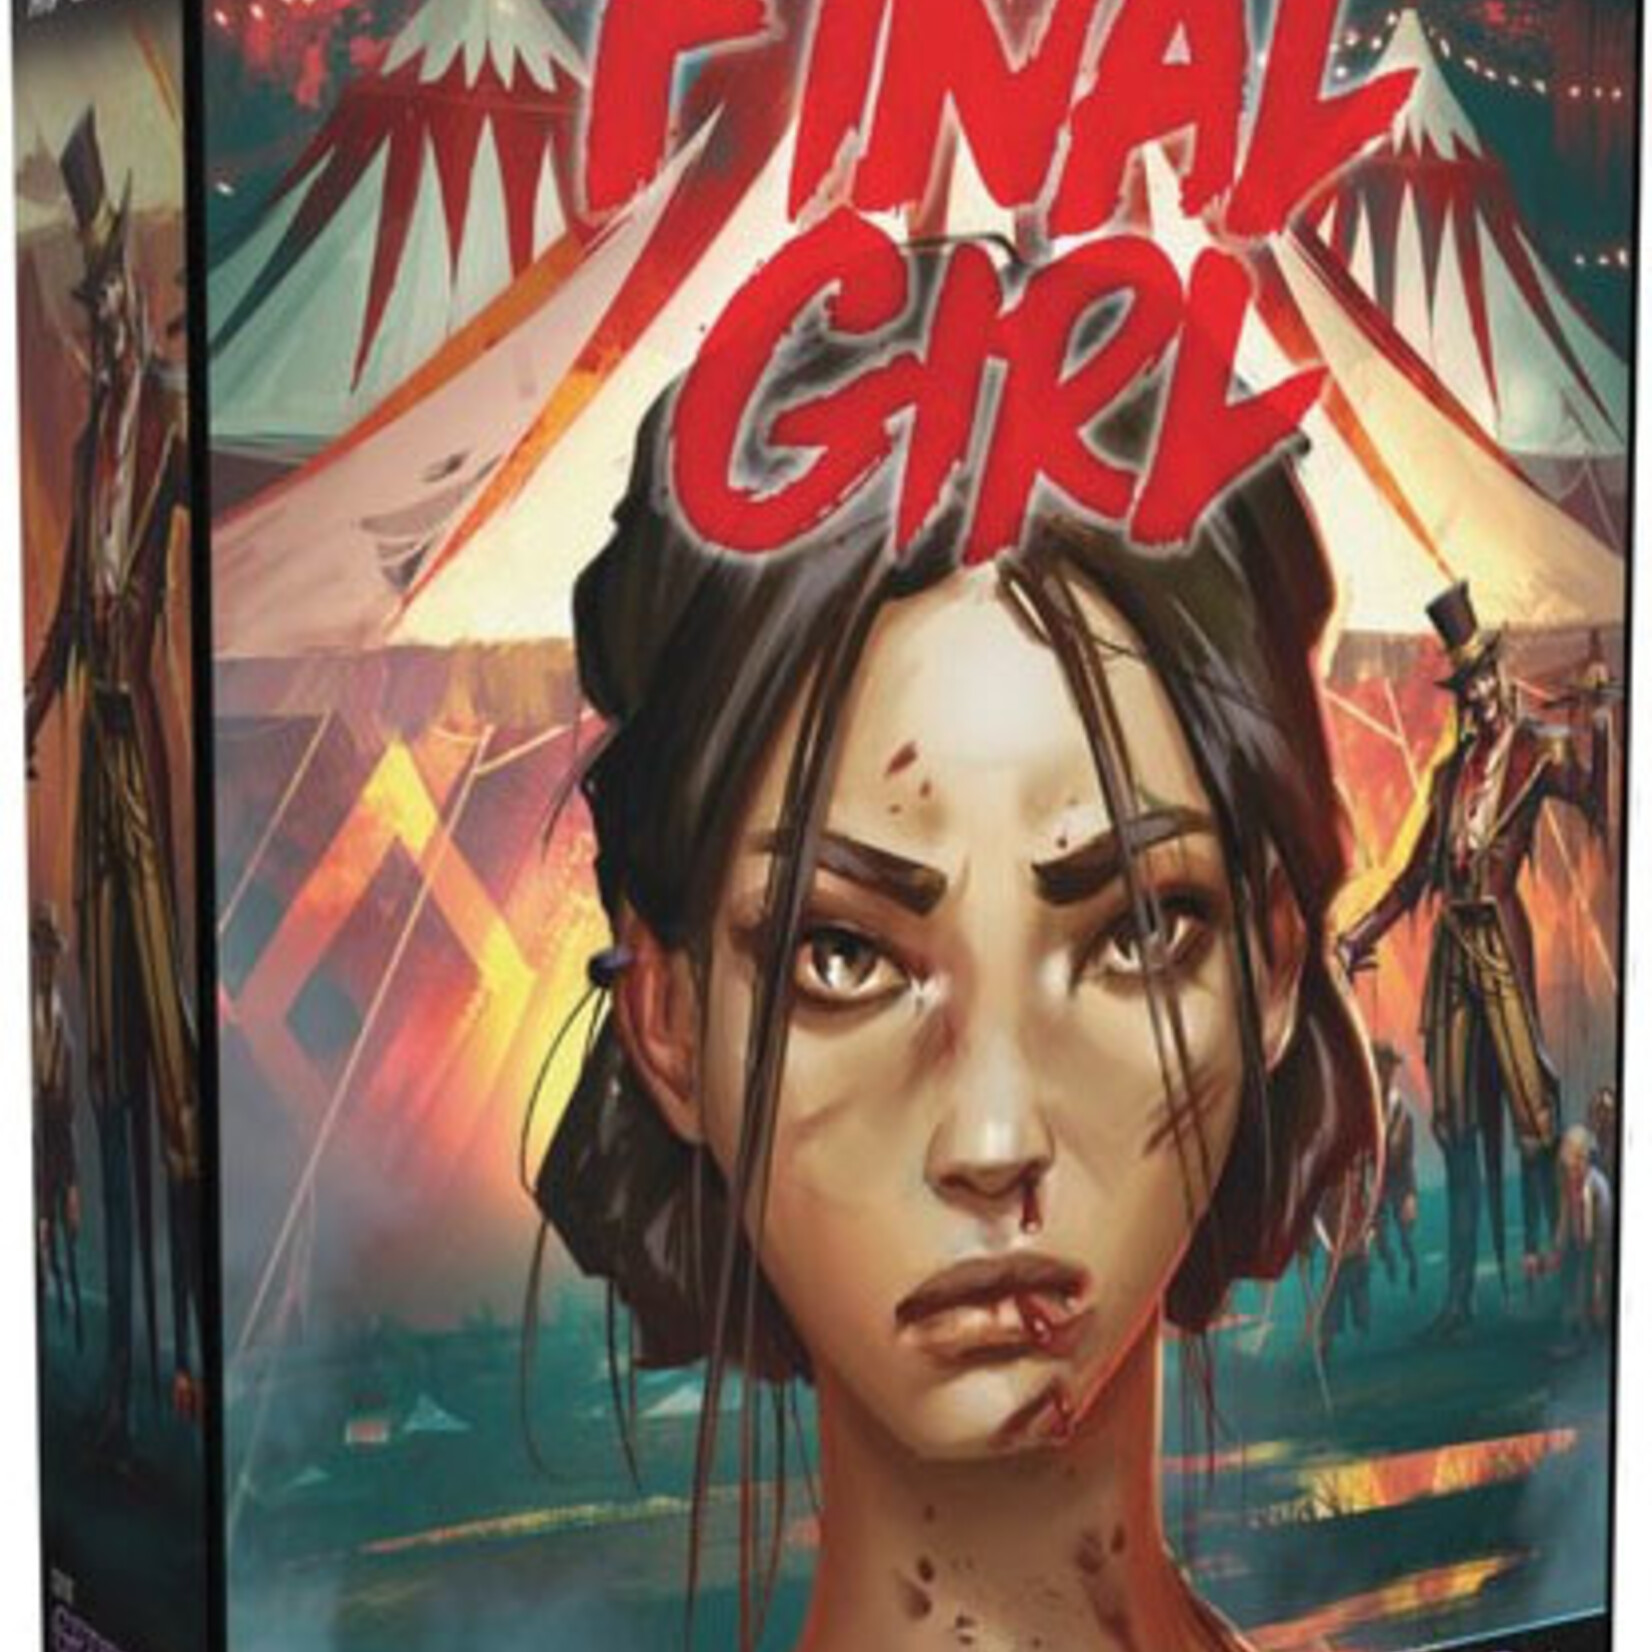 Van Ryder Games Final Girl: Carnage at the Carnival Feature Film Expansion